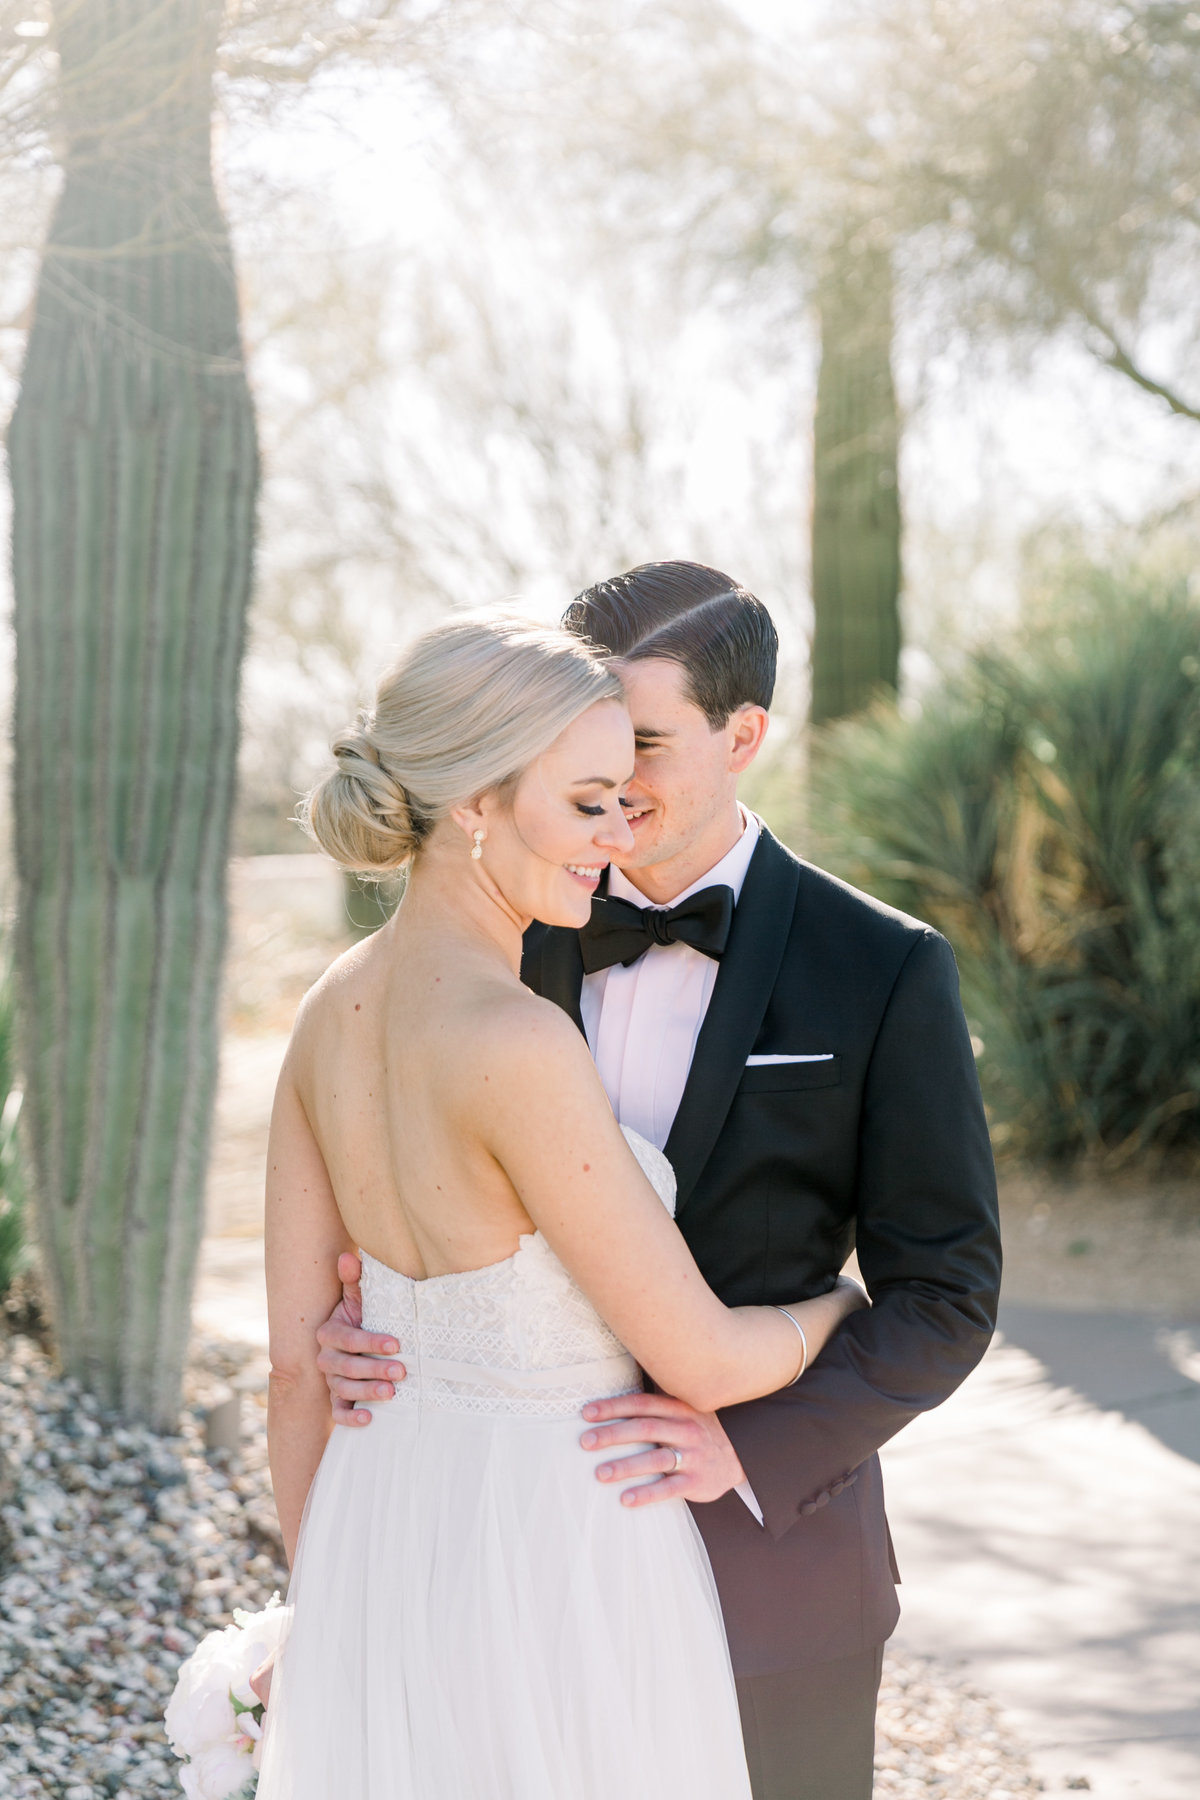 Karlie Colleen Photography - Arizona Wedding at The Troon Scottsdale Country Club - Paige & Shane -207